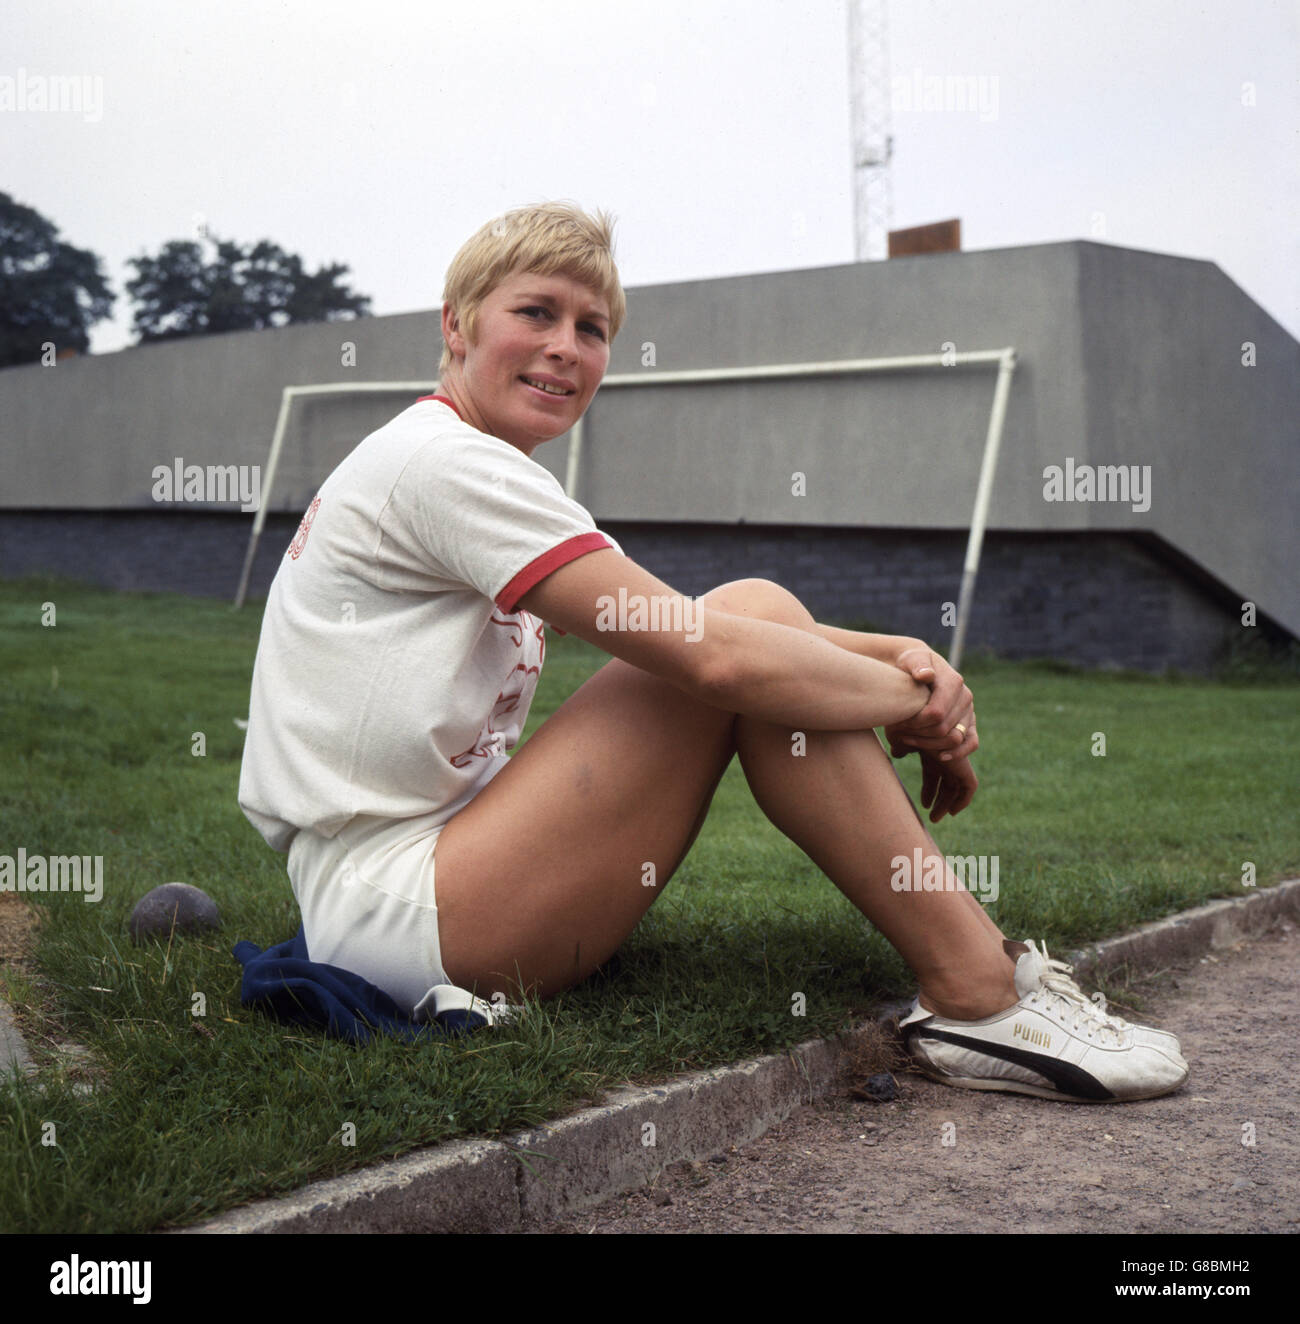 Mary Rand, who has been selected to run the women's 80 metres hurdles at the Mexico Olympic Games and is also trying to qualify for the Pentathlon, pictured at a training session in London. Stock Photo